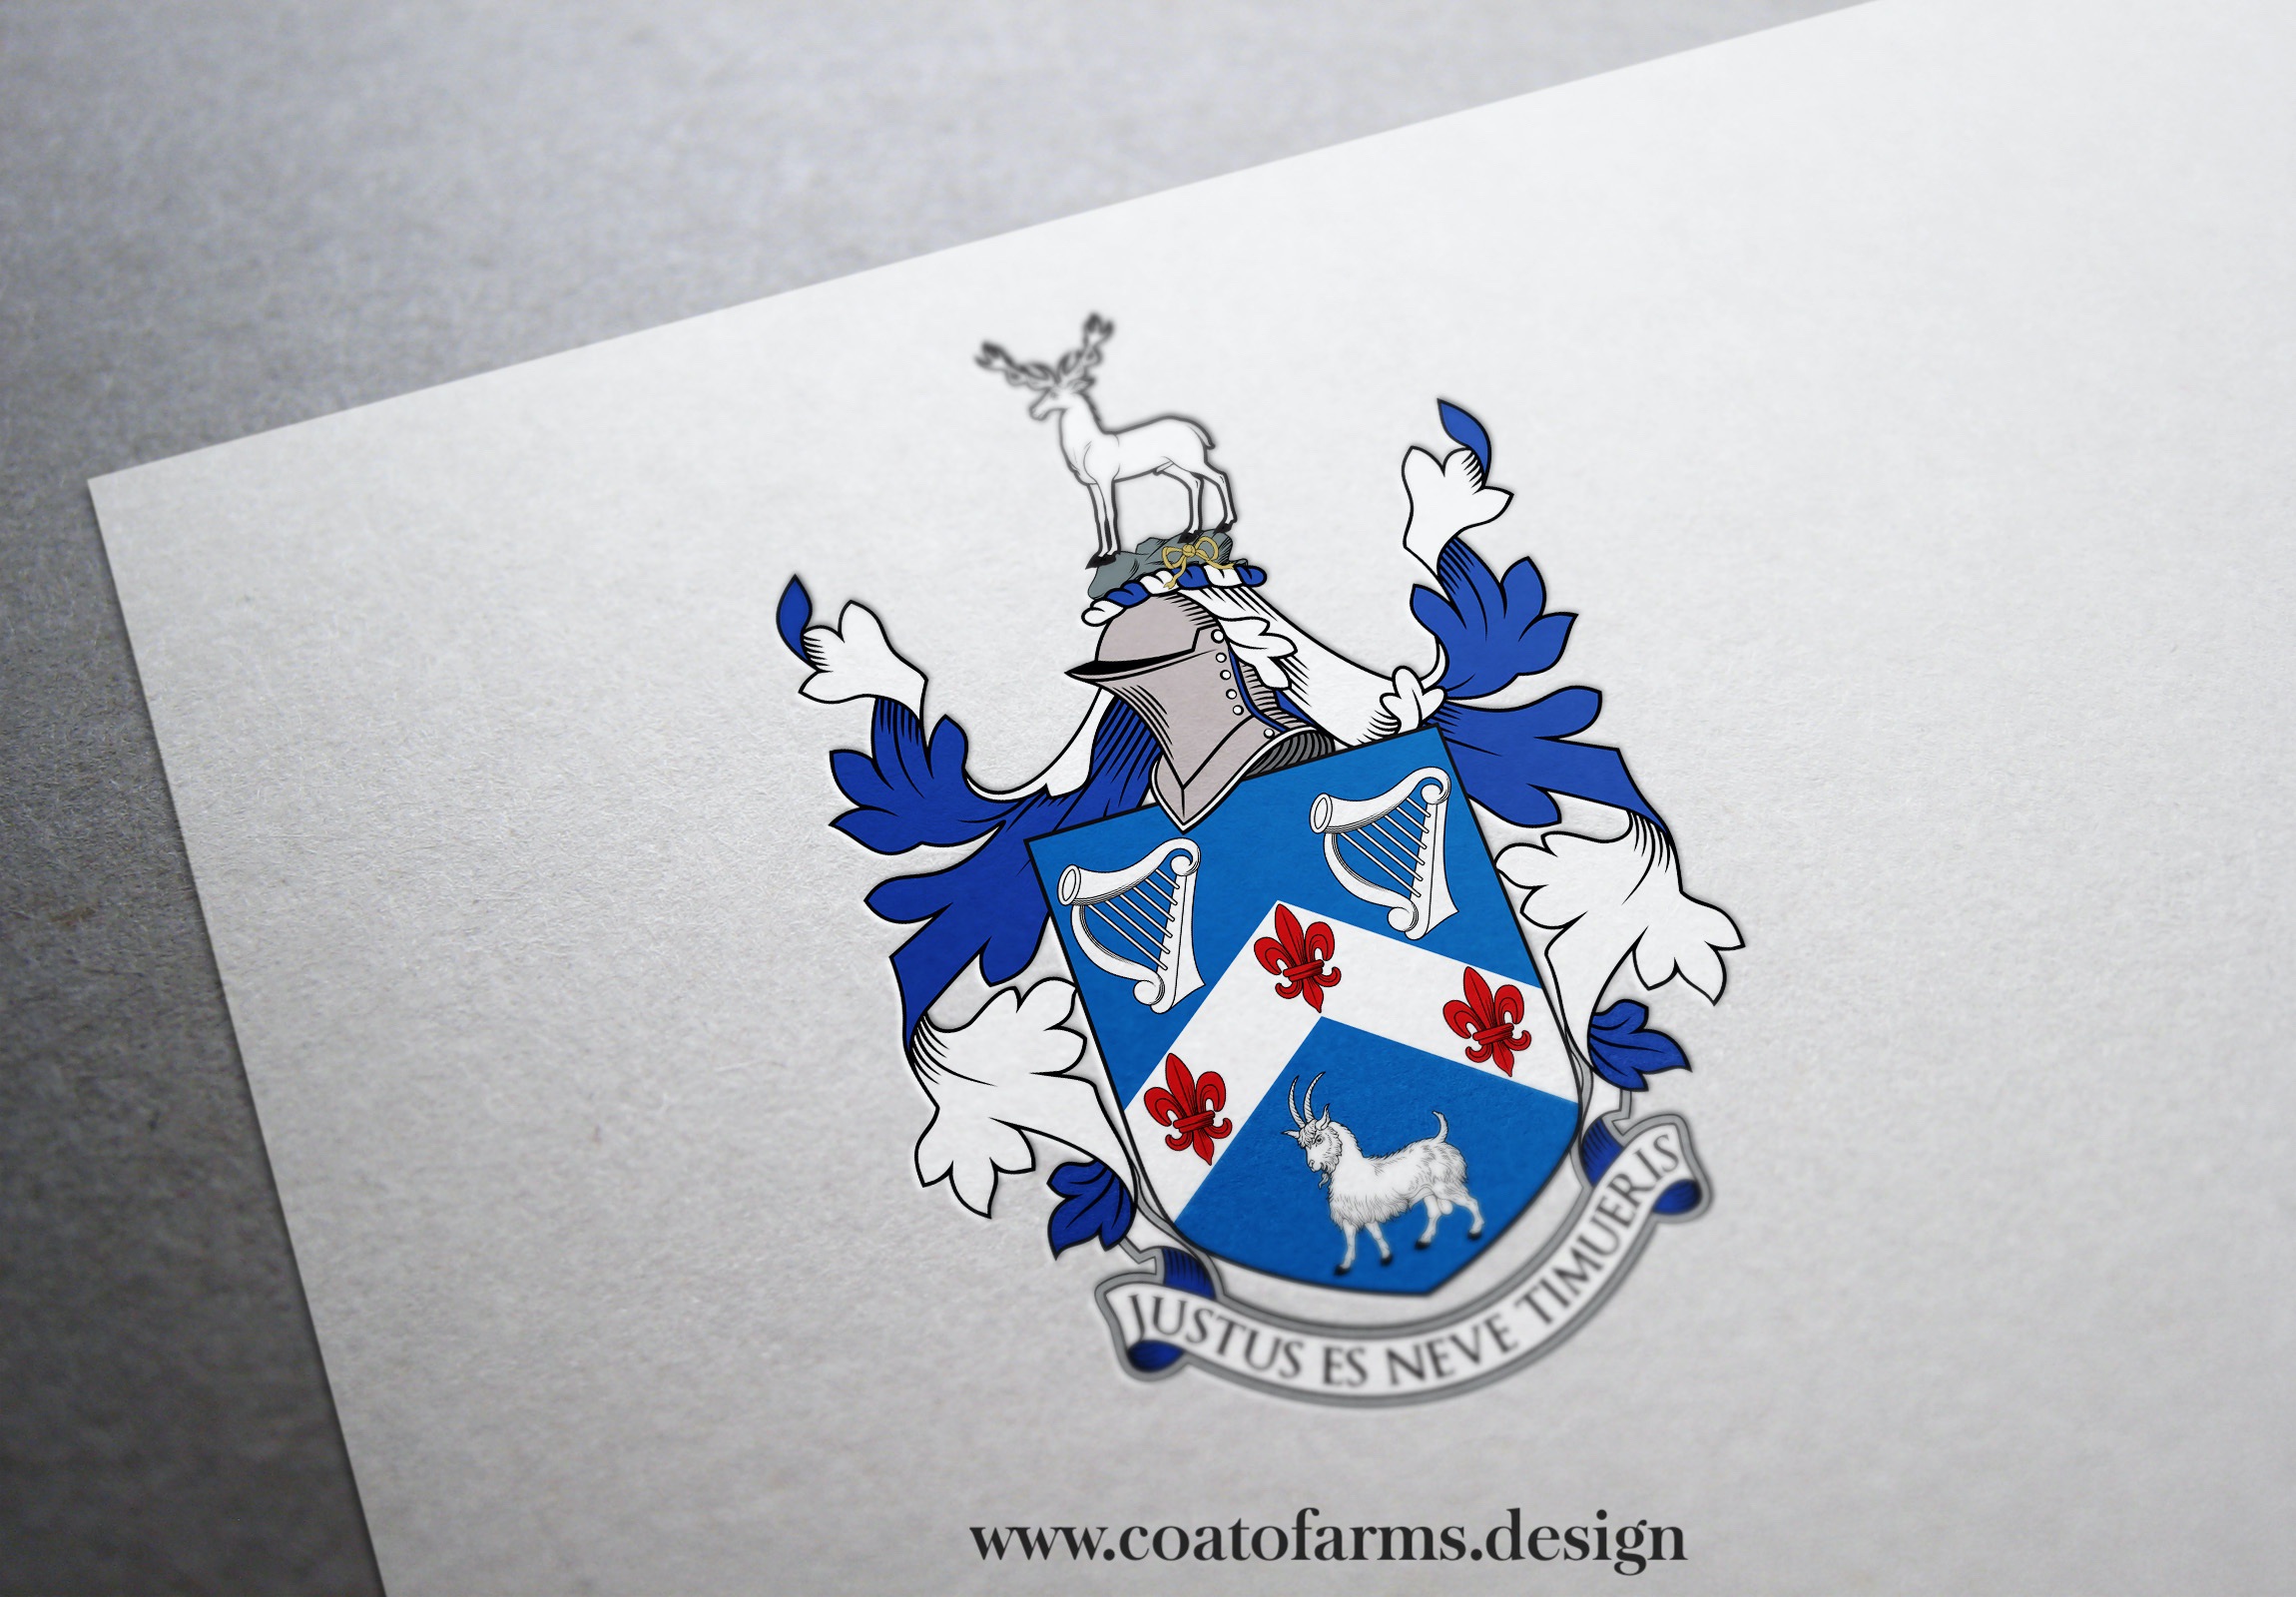 Coat of arms I redesigned for a British family according to the existing painted relief (with some changes)